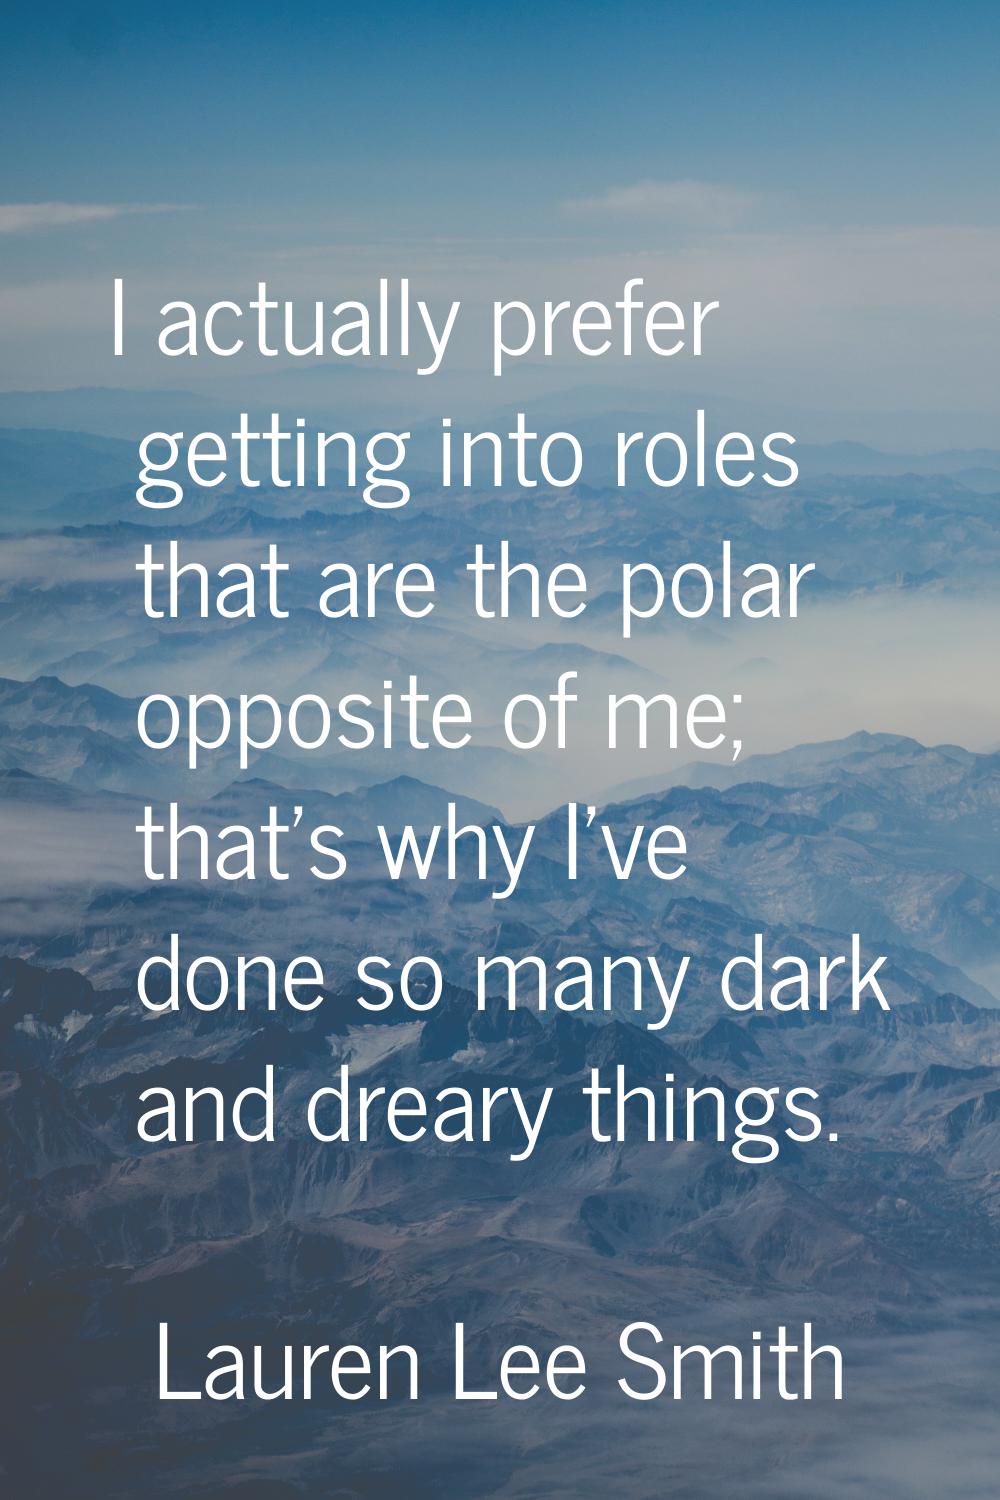 I actually prefer getting into roles that are the polar opposite of me; that's why I've done so man